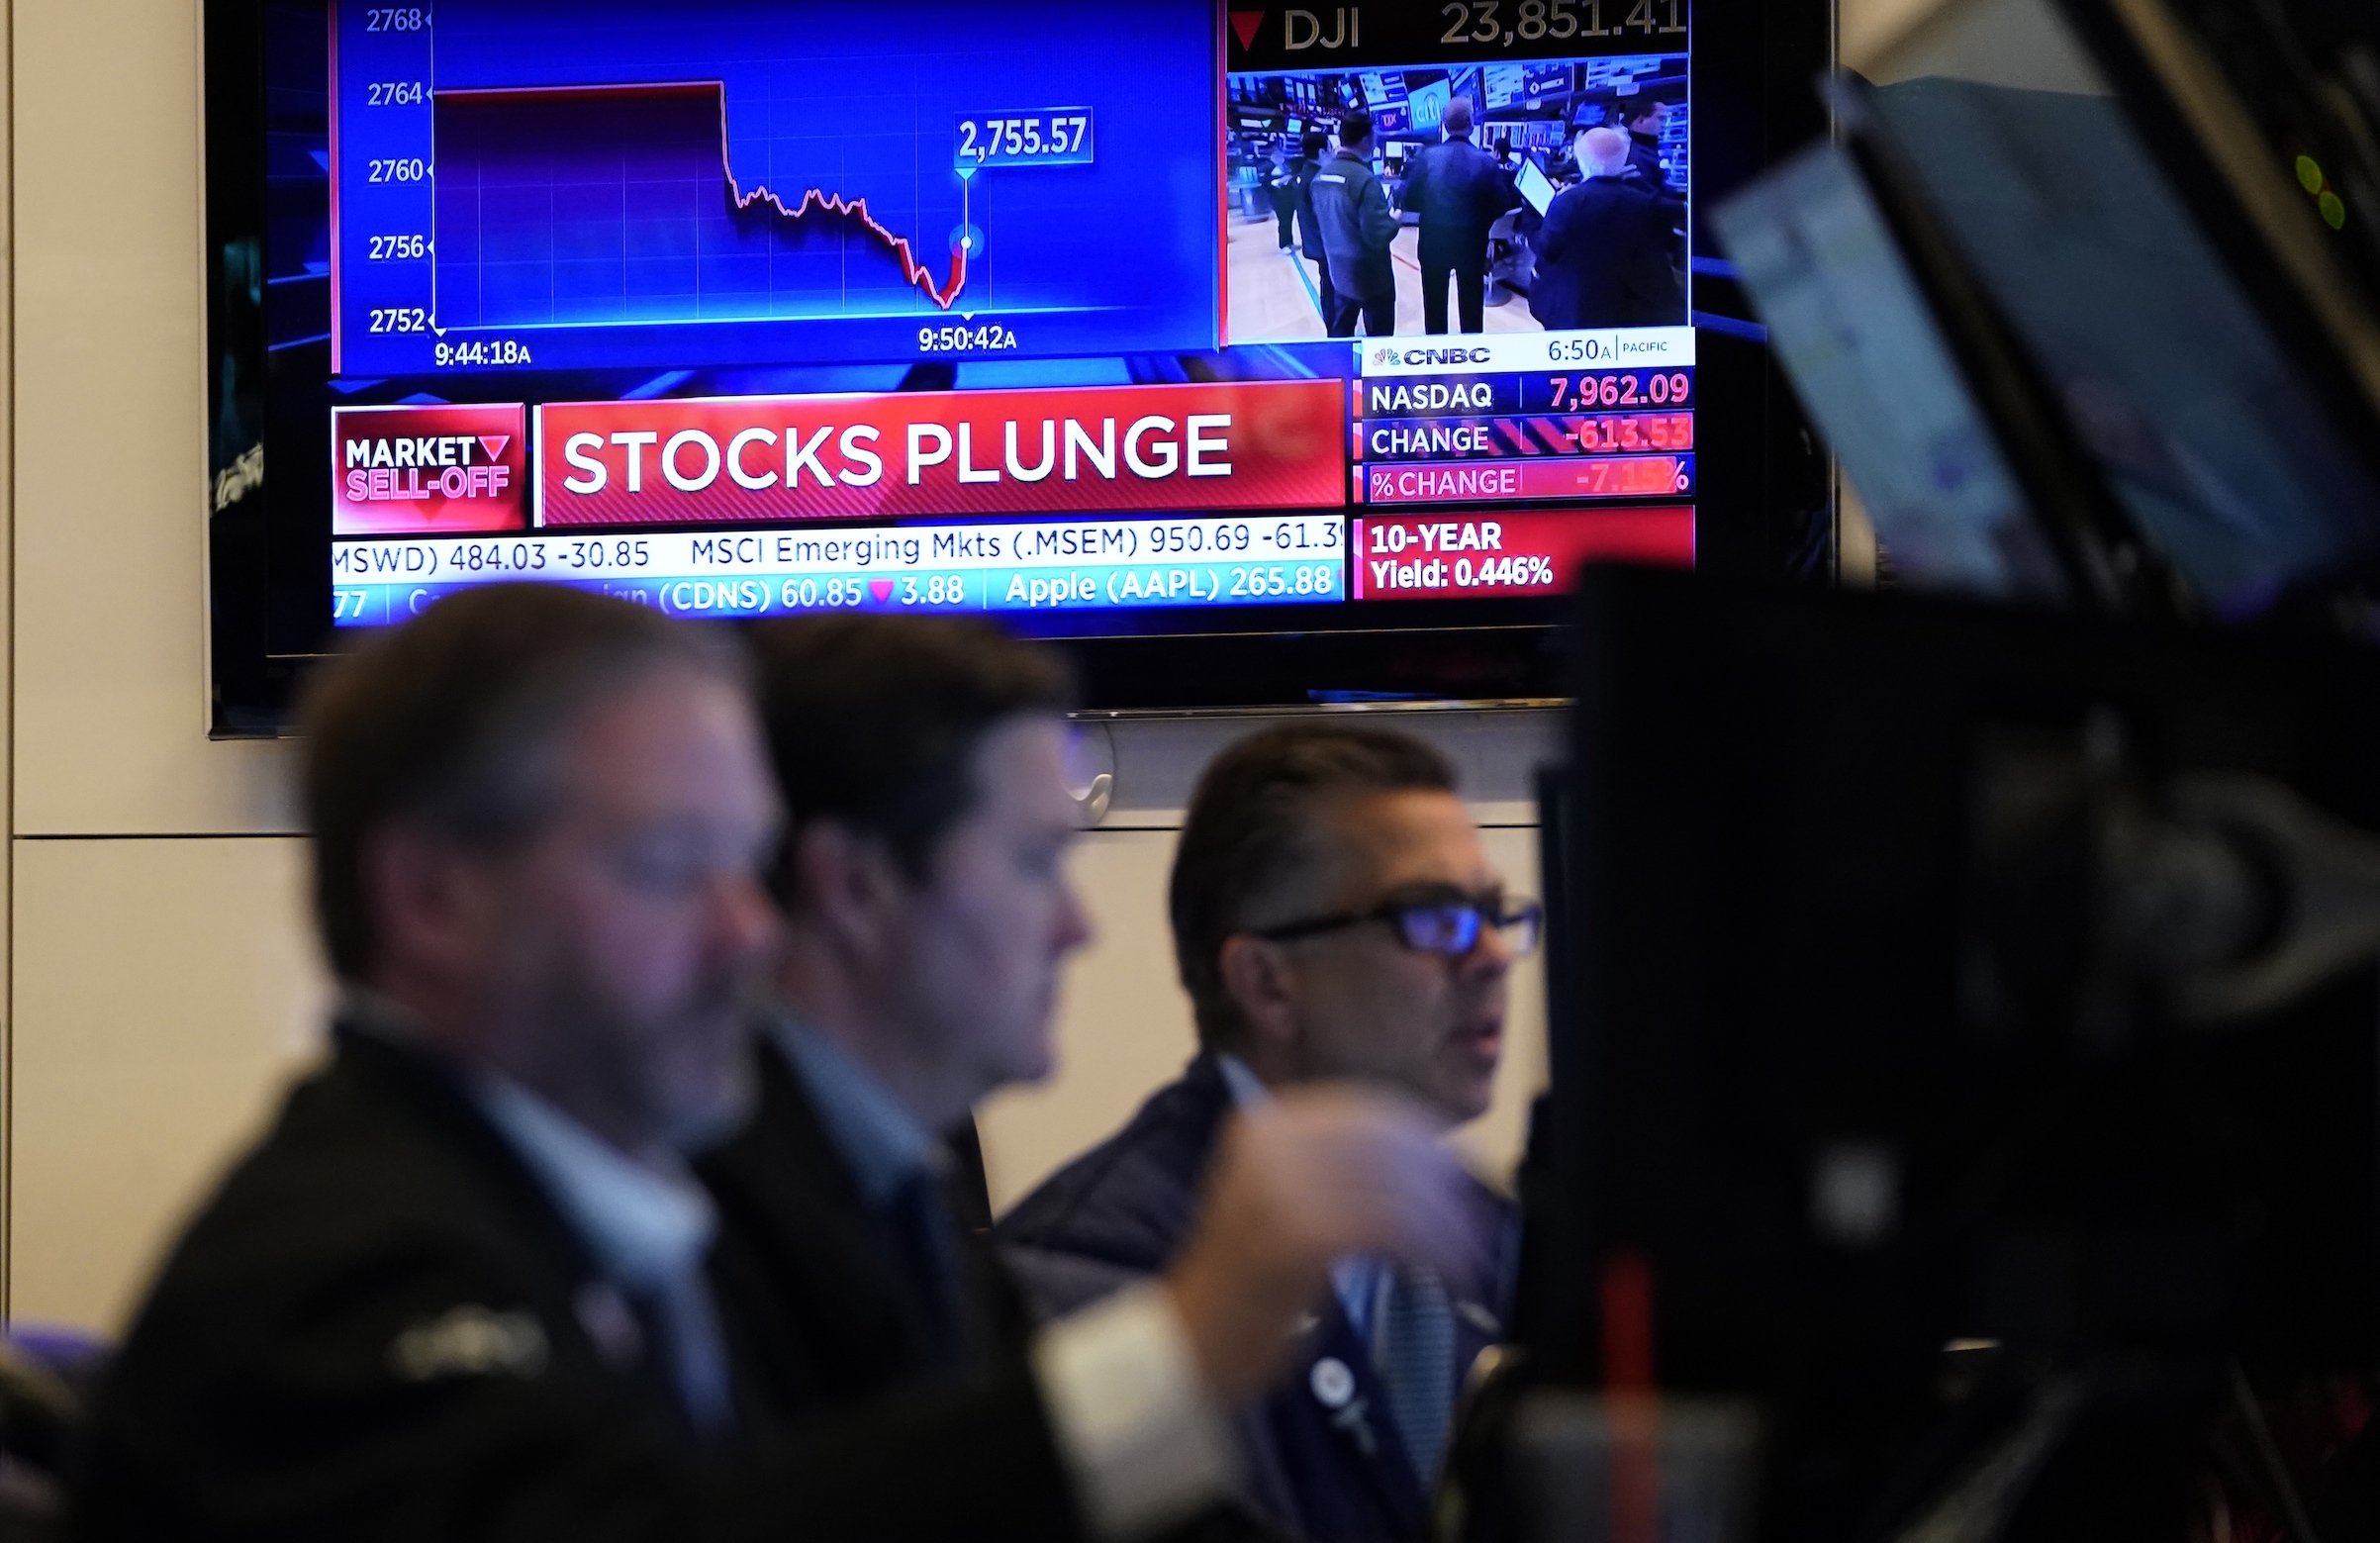 Traders during the opening bell on the New York Stock Exchange on March 9 in New York City. - Trading on Wall Street was temporarily halted early March 9 as U.S. stocks joined a global rout on crashing oil prices and mounting worries over the coronavirus. (AFP via Getty Images)